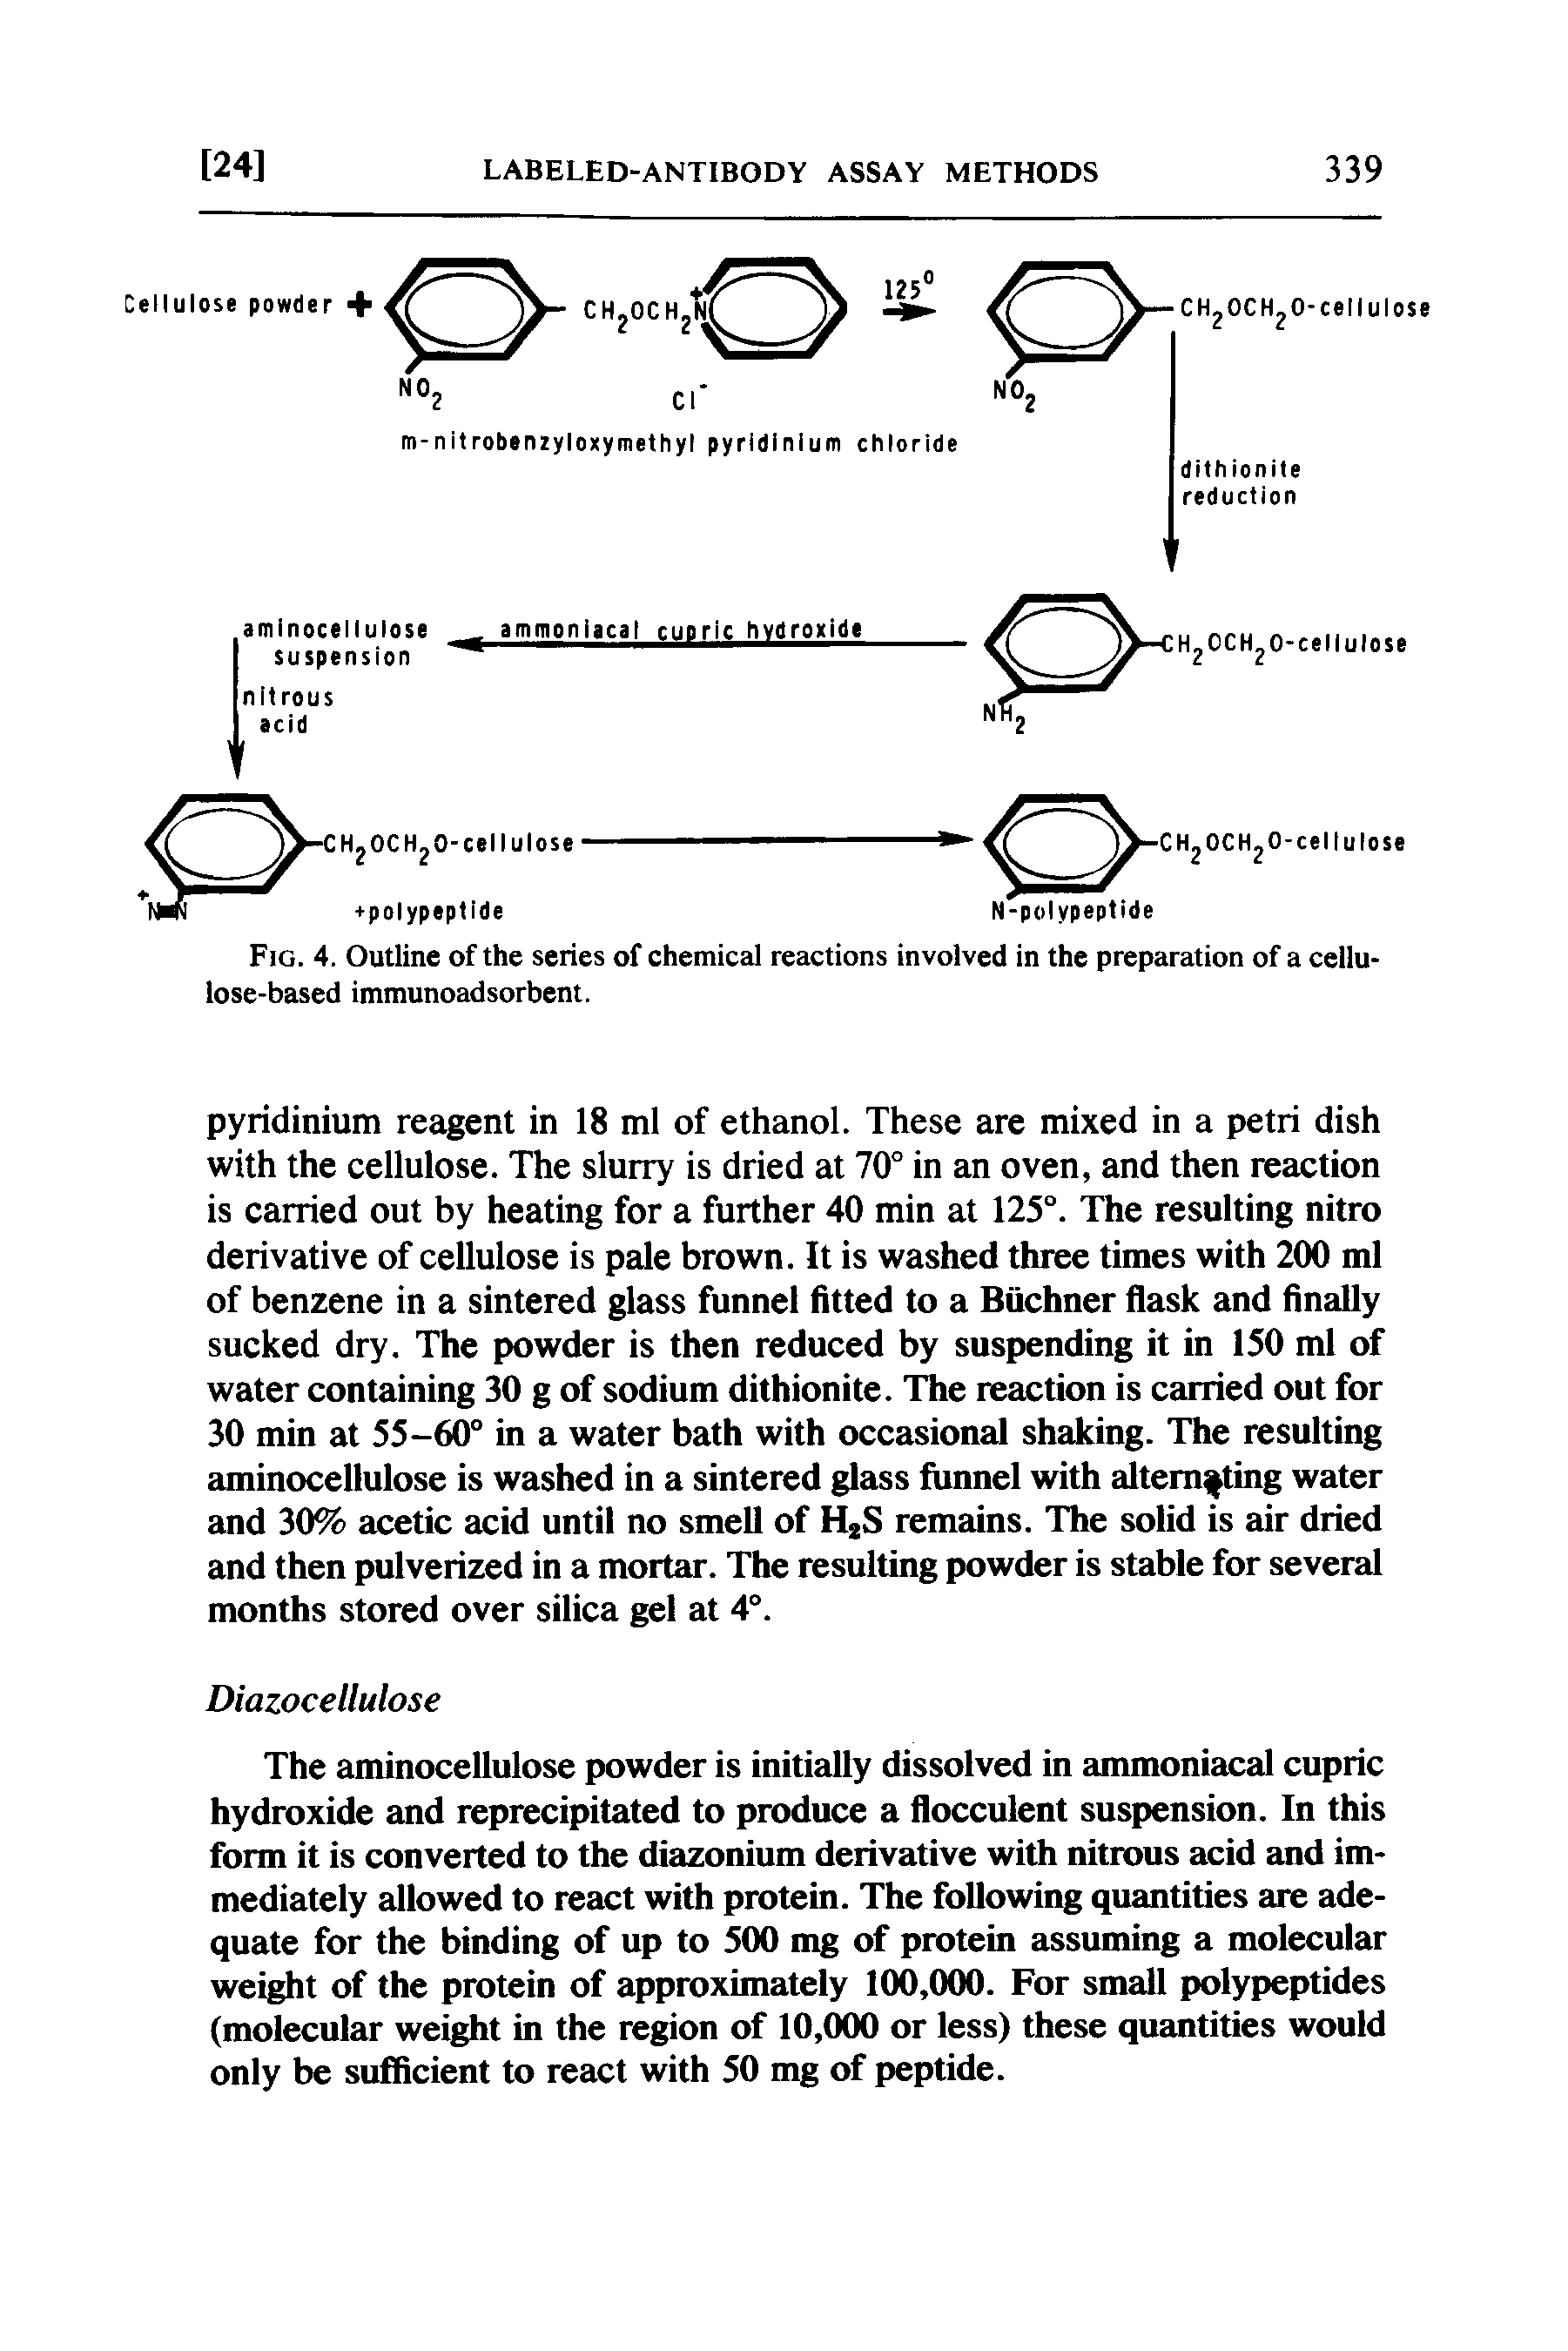 Fig. 4. Outline of the series of chemical reactions involved in the preparation of a cellulose-based immunoadsorbent.